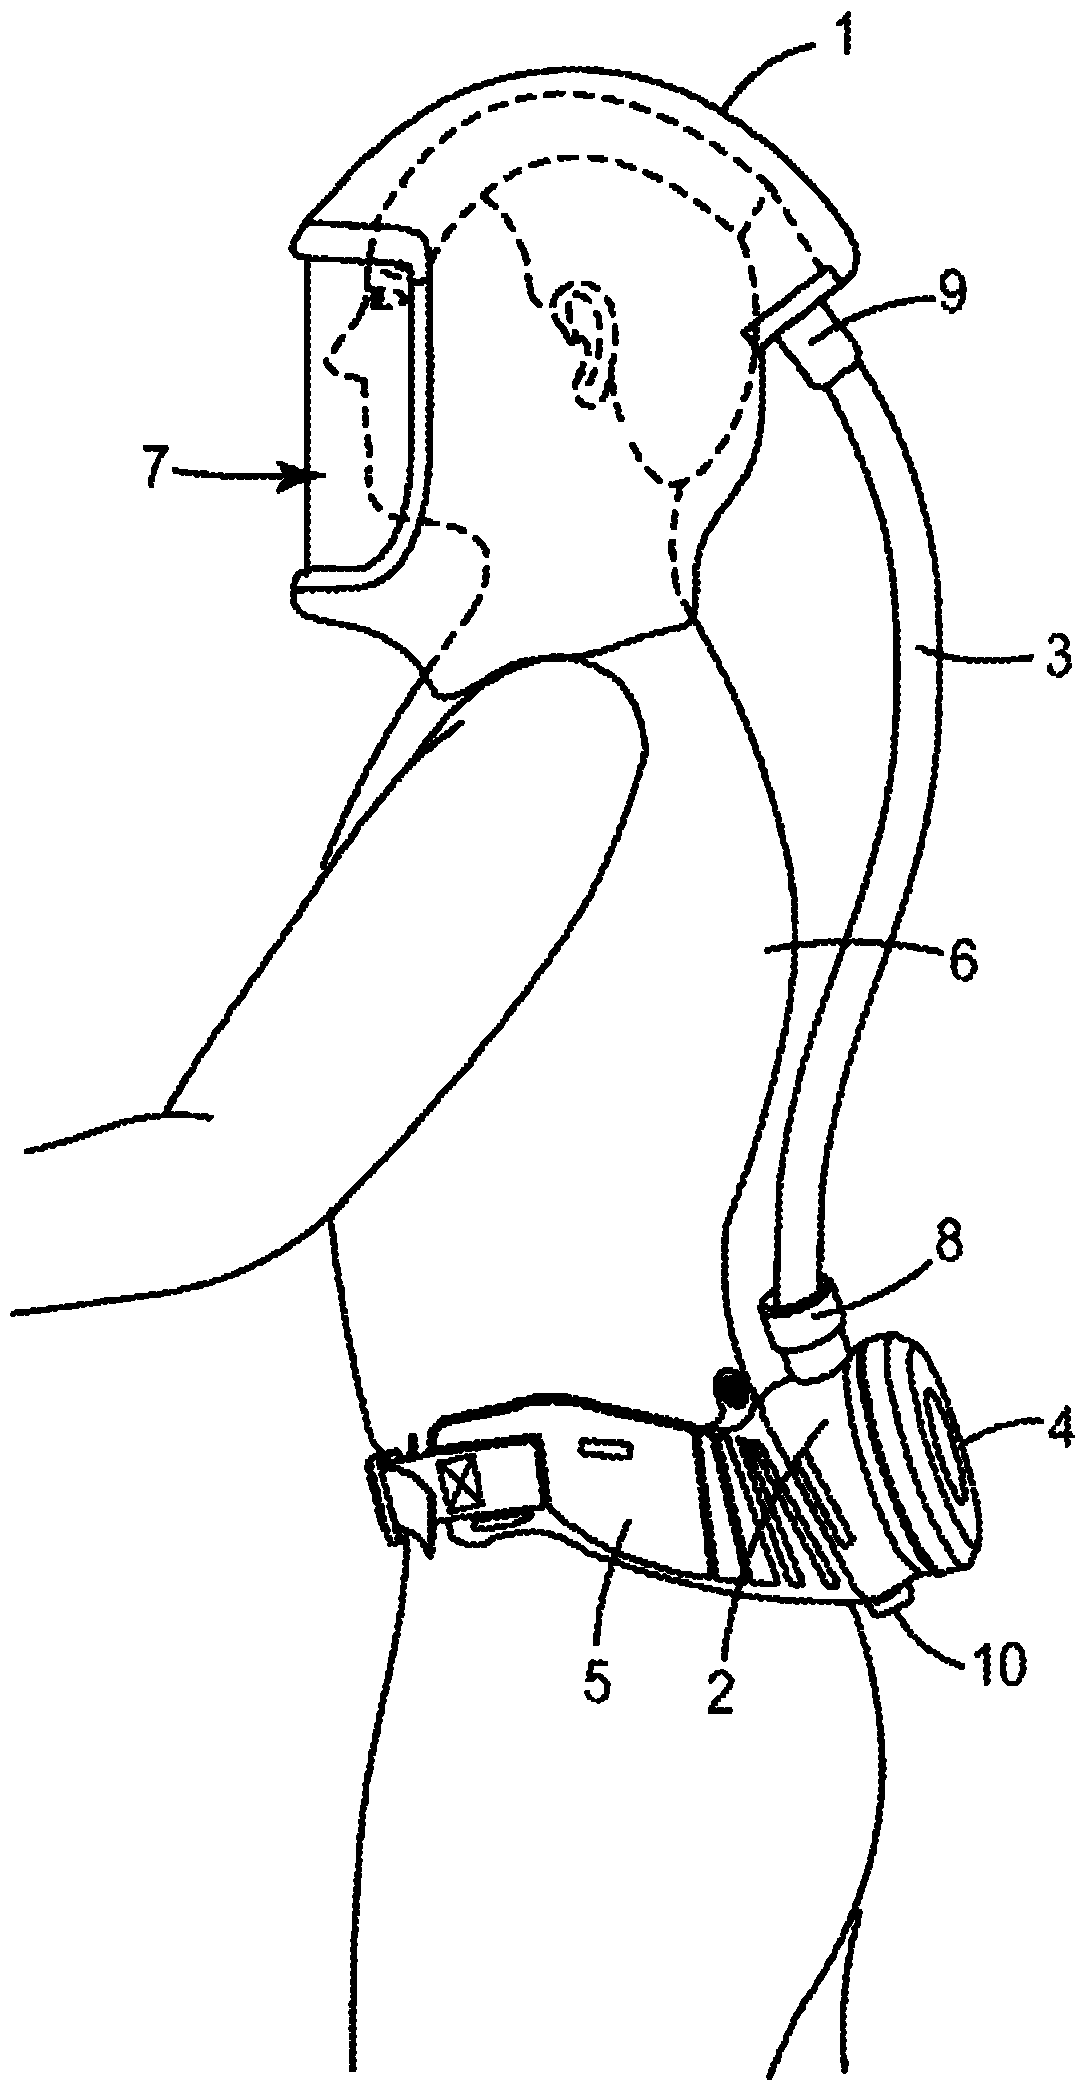 Method of controlling a powered air purifying respirator